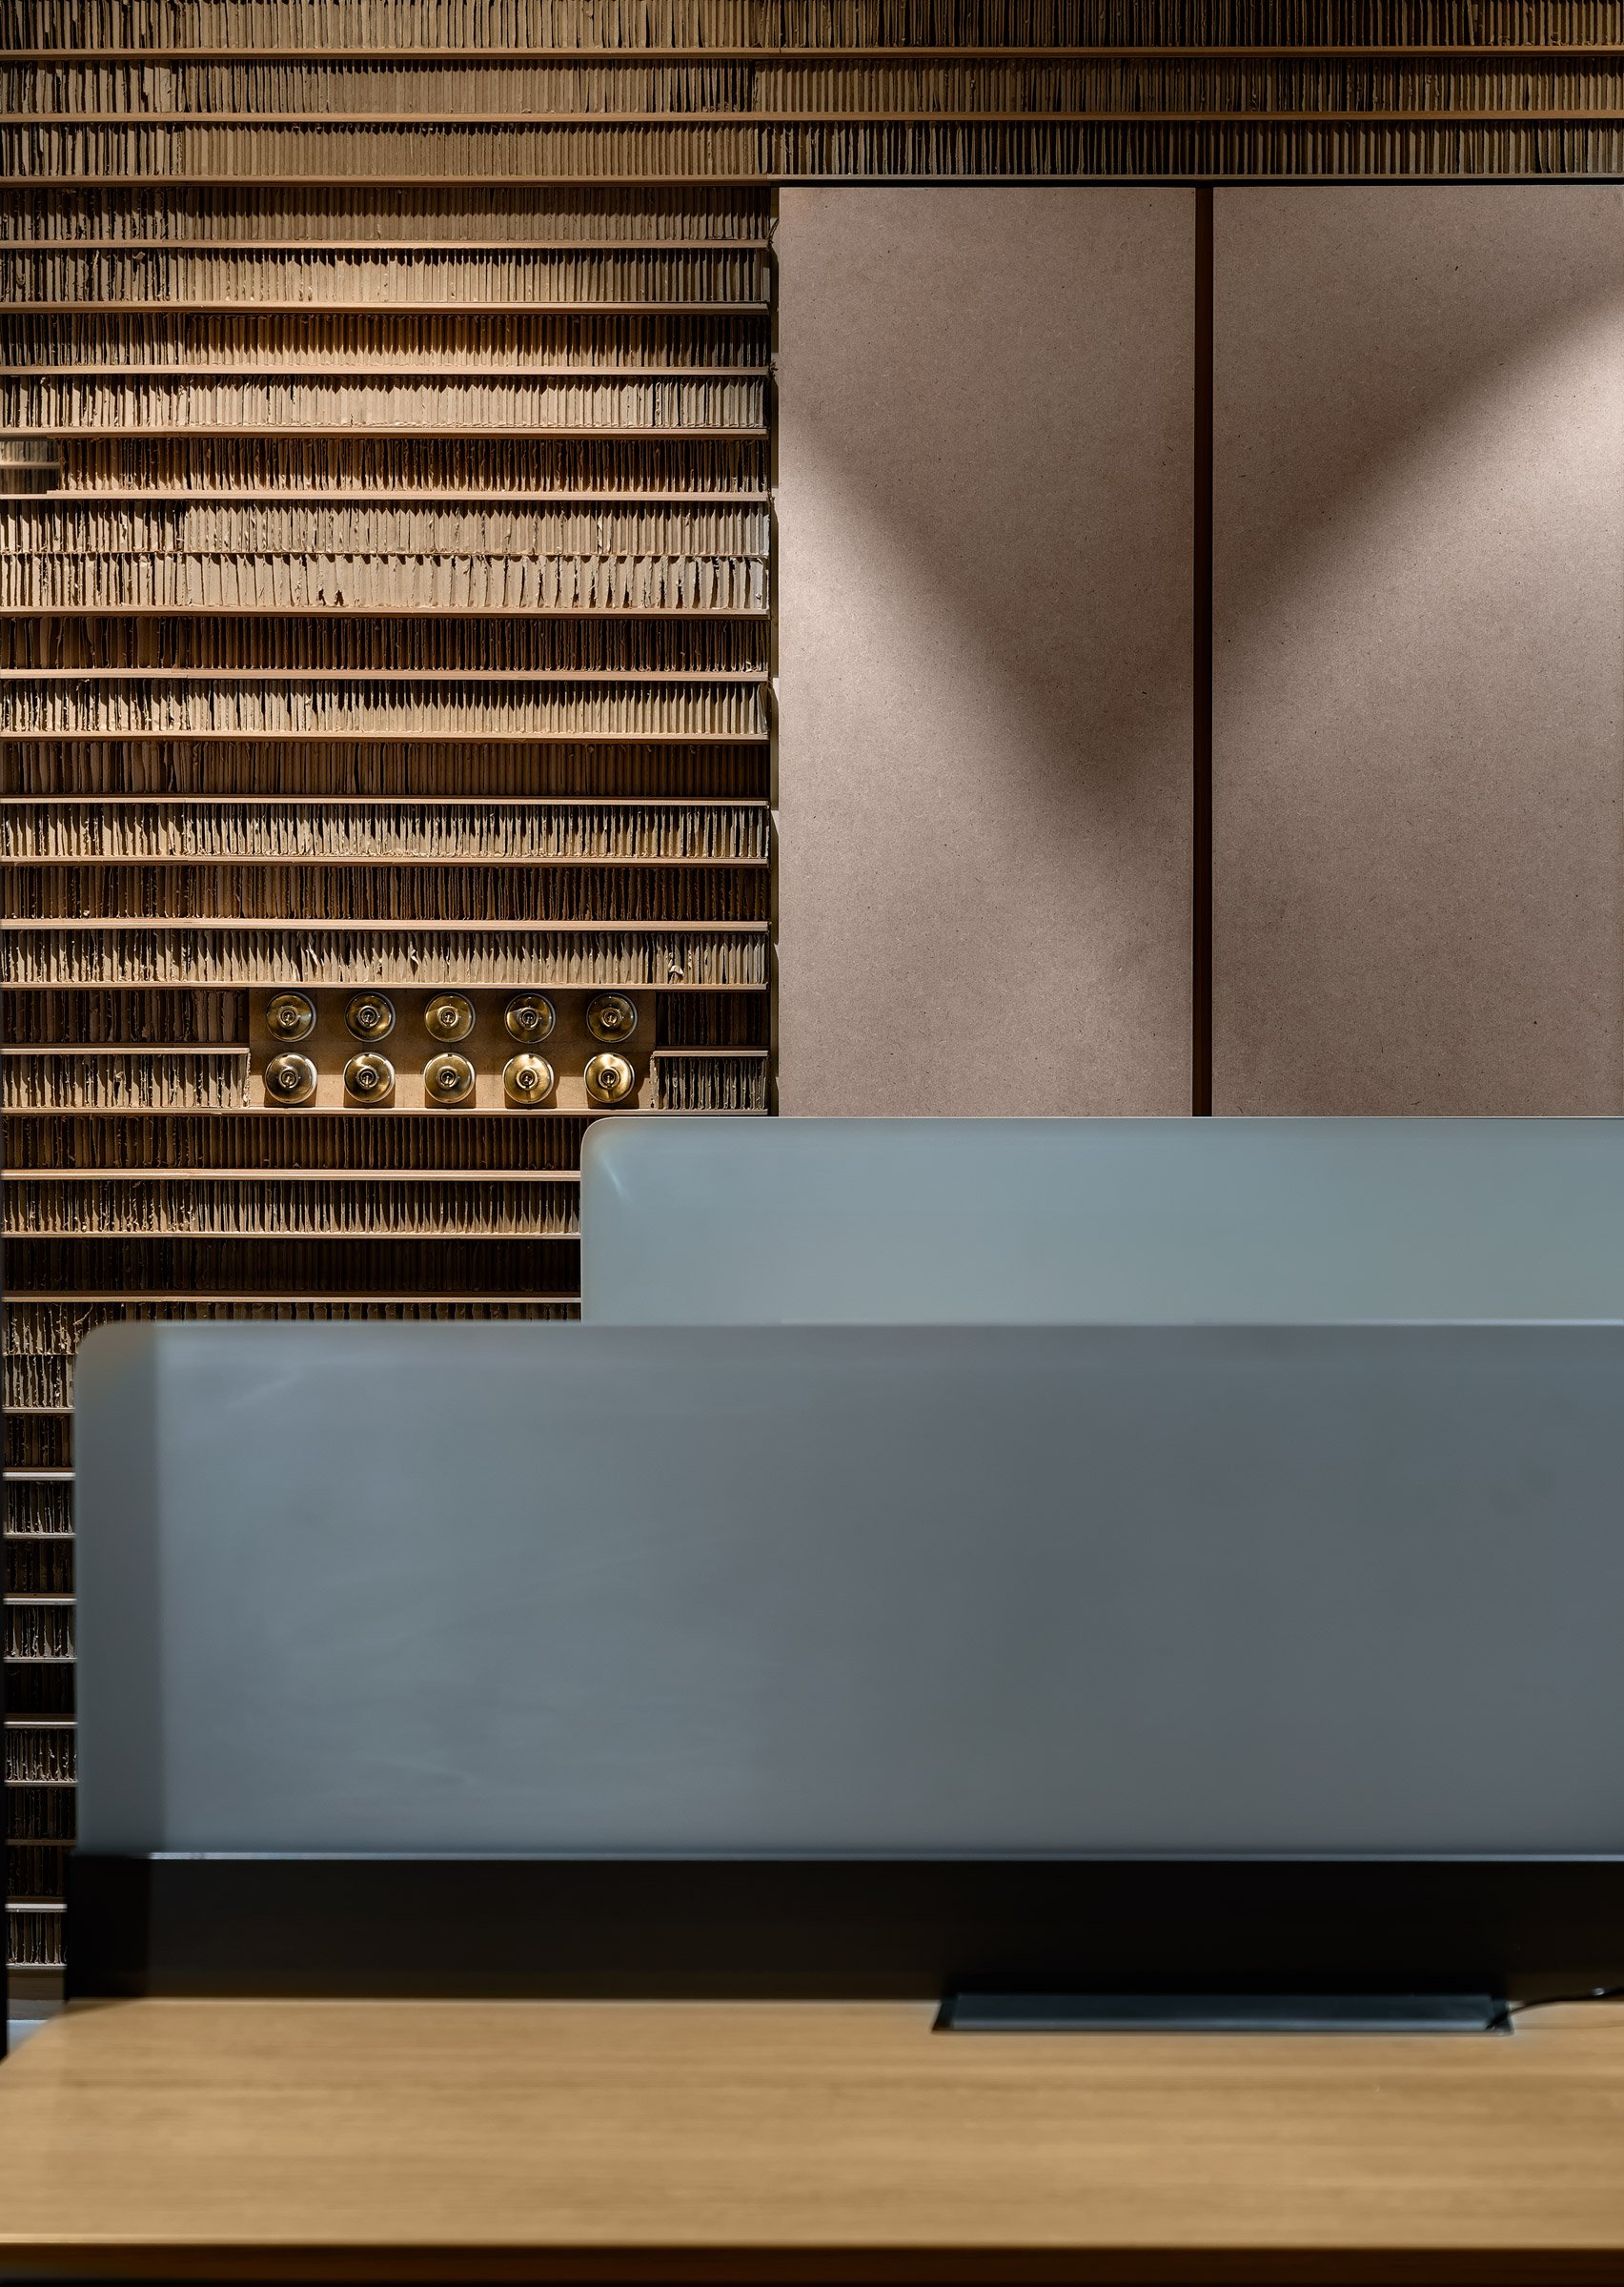 Reception desk of Office in Cardboard by Studio VDGA in Pune, India